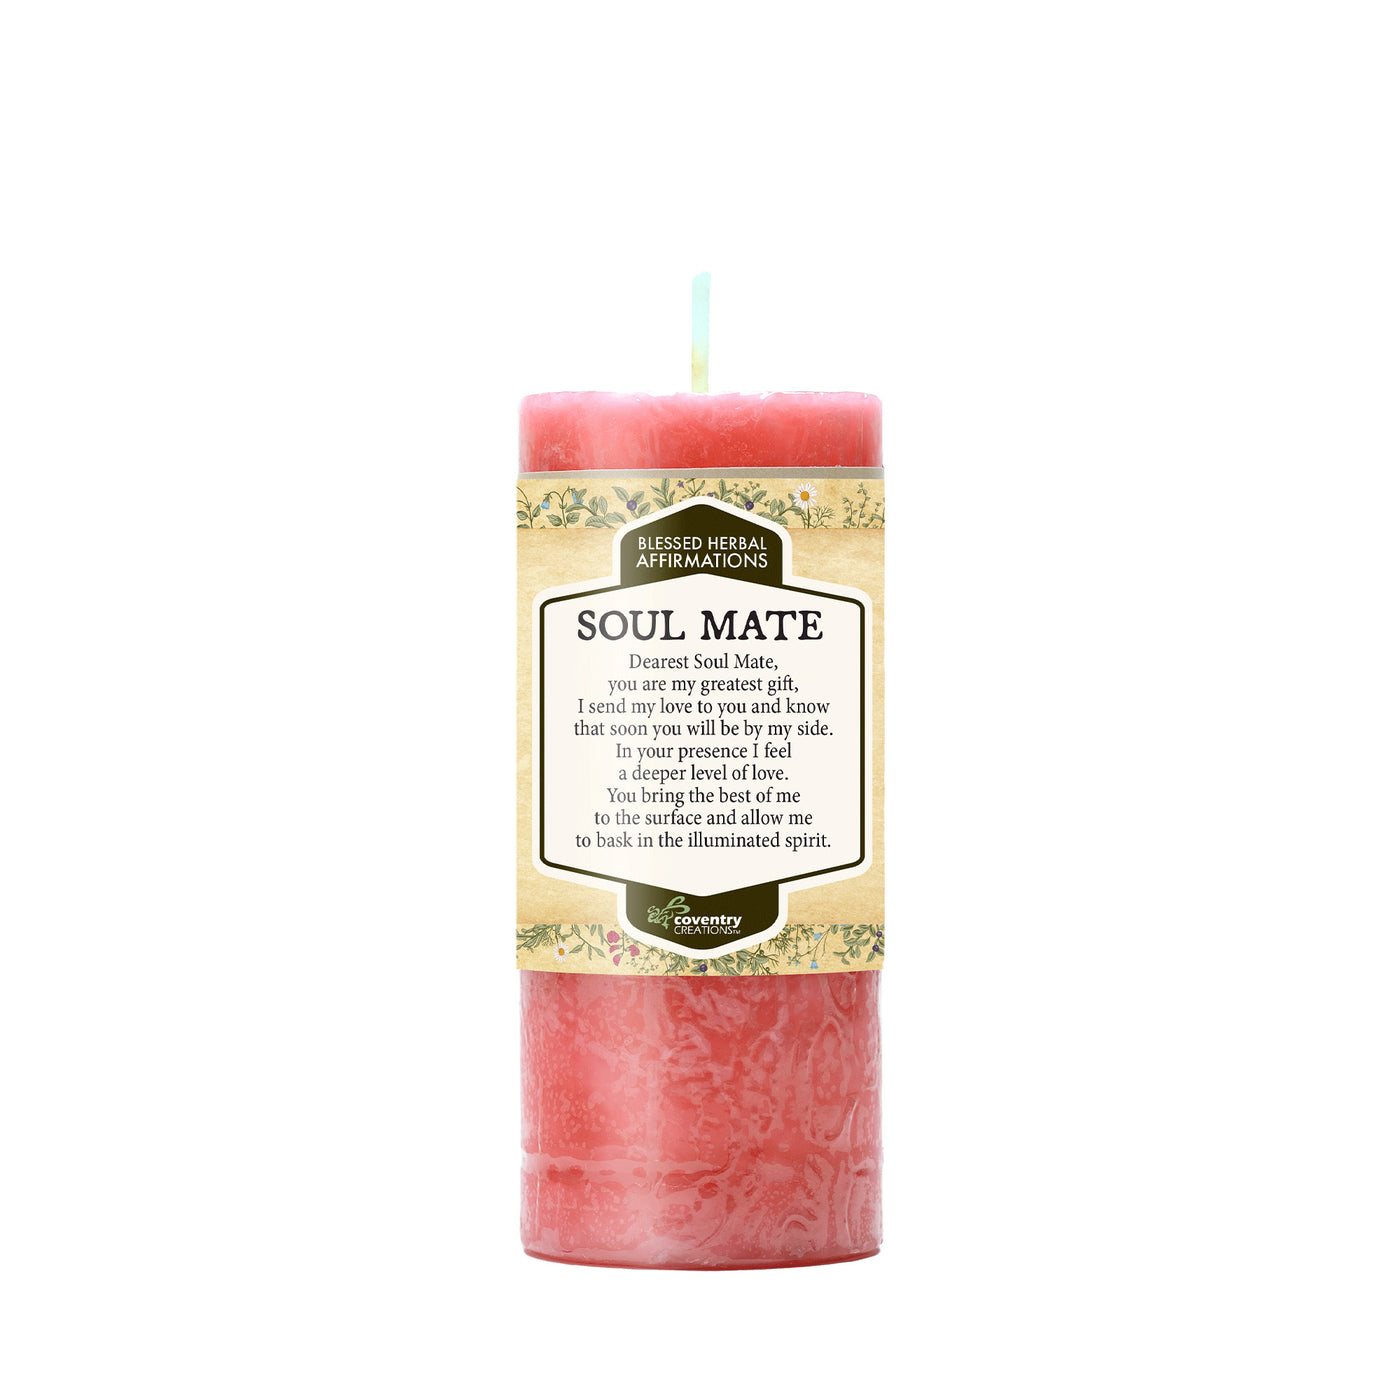  Coventry Creations Affirmation Soul Mate Pink candle